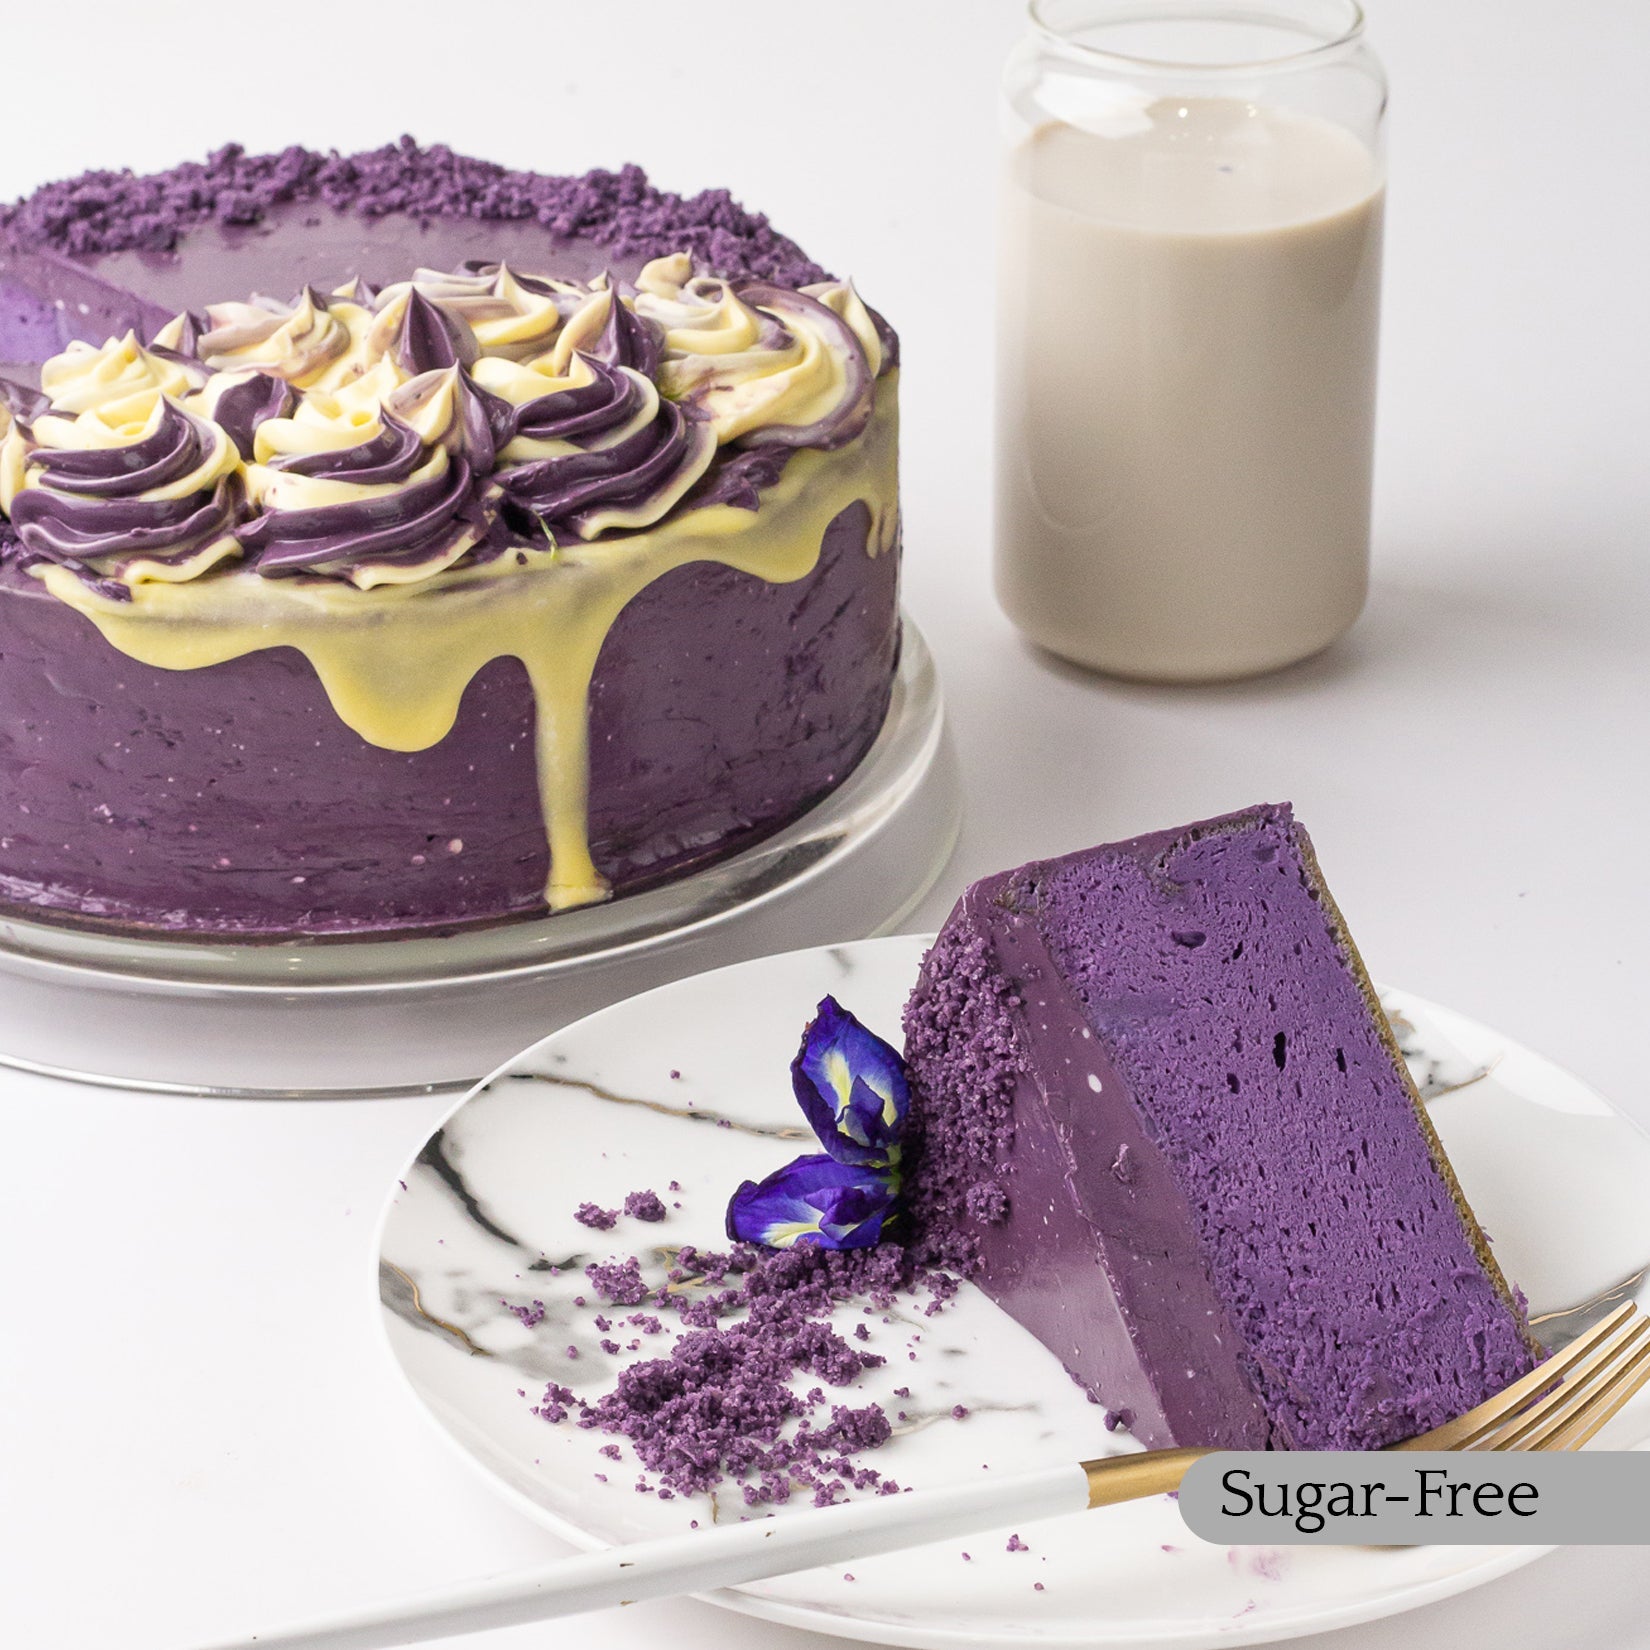 The Sugar-Free Bakery | Sugar-Free Gifts | Sugar Free Gift | Sugar-Free Cake | Sugar Free Cake | Holiday Gifting | Christmas Gifts | Corporate Gifting | Dessert | Spread | Bread | Very Peri